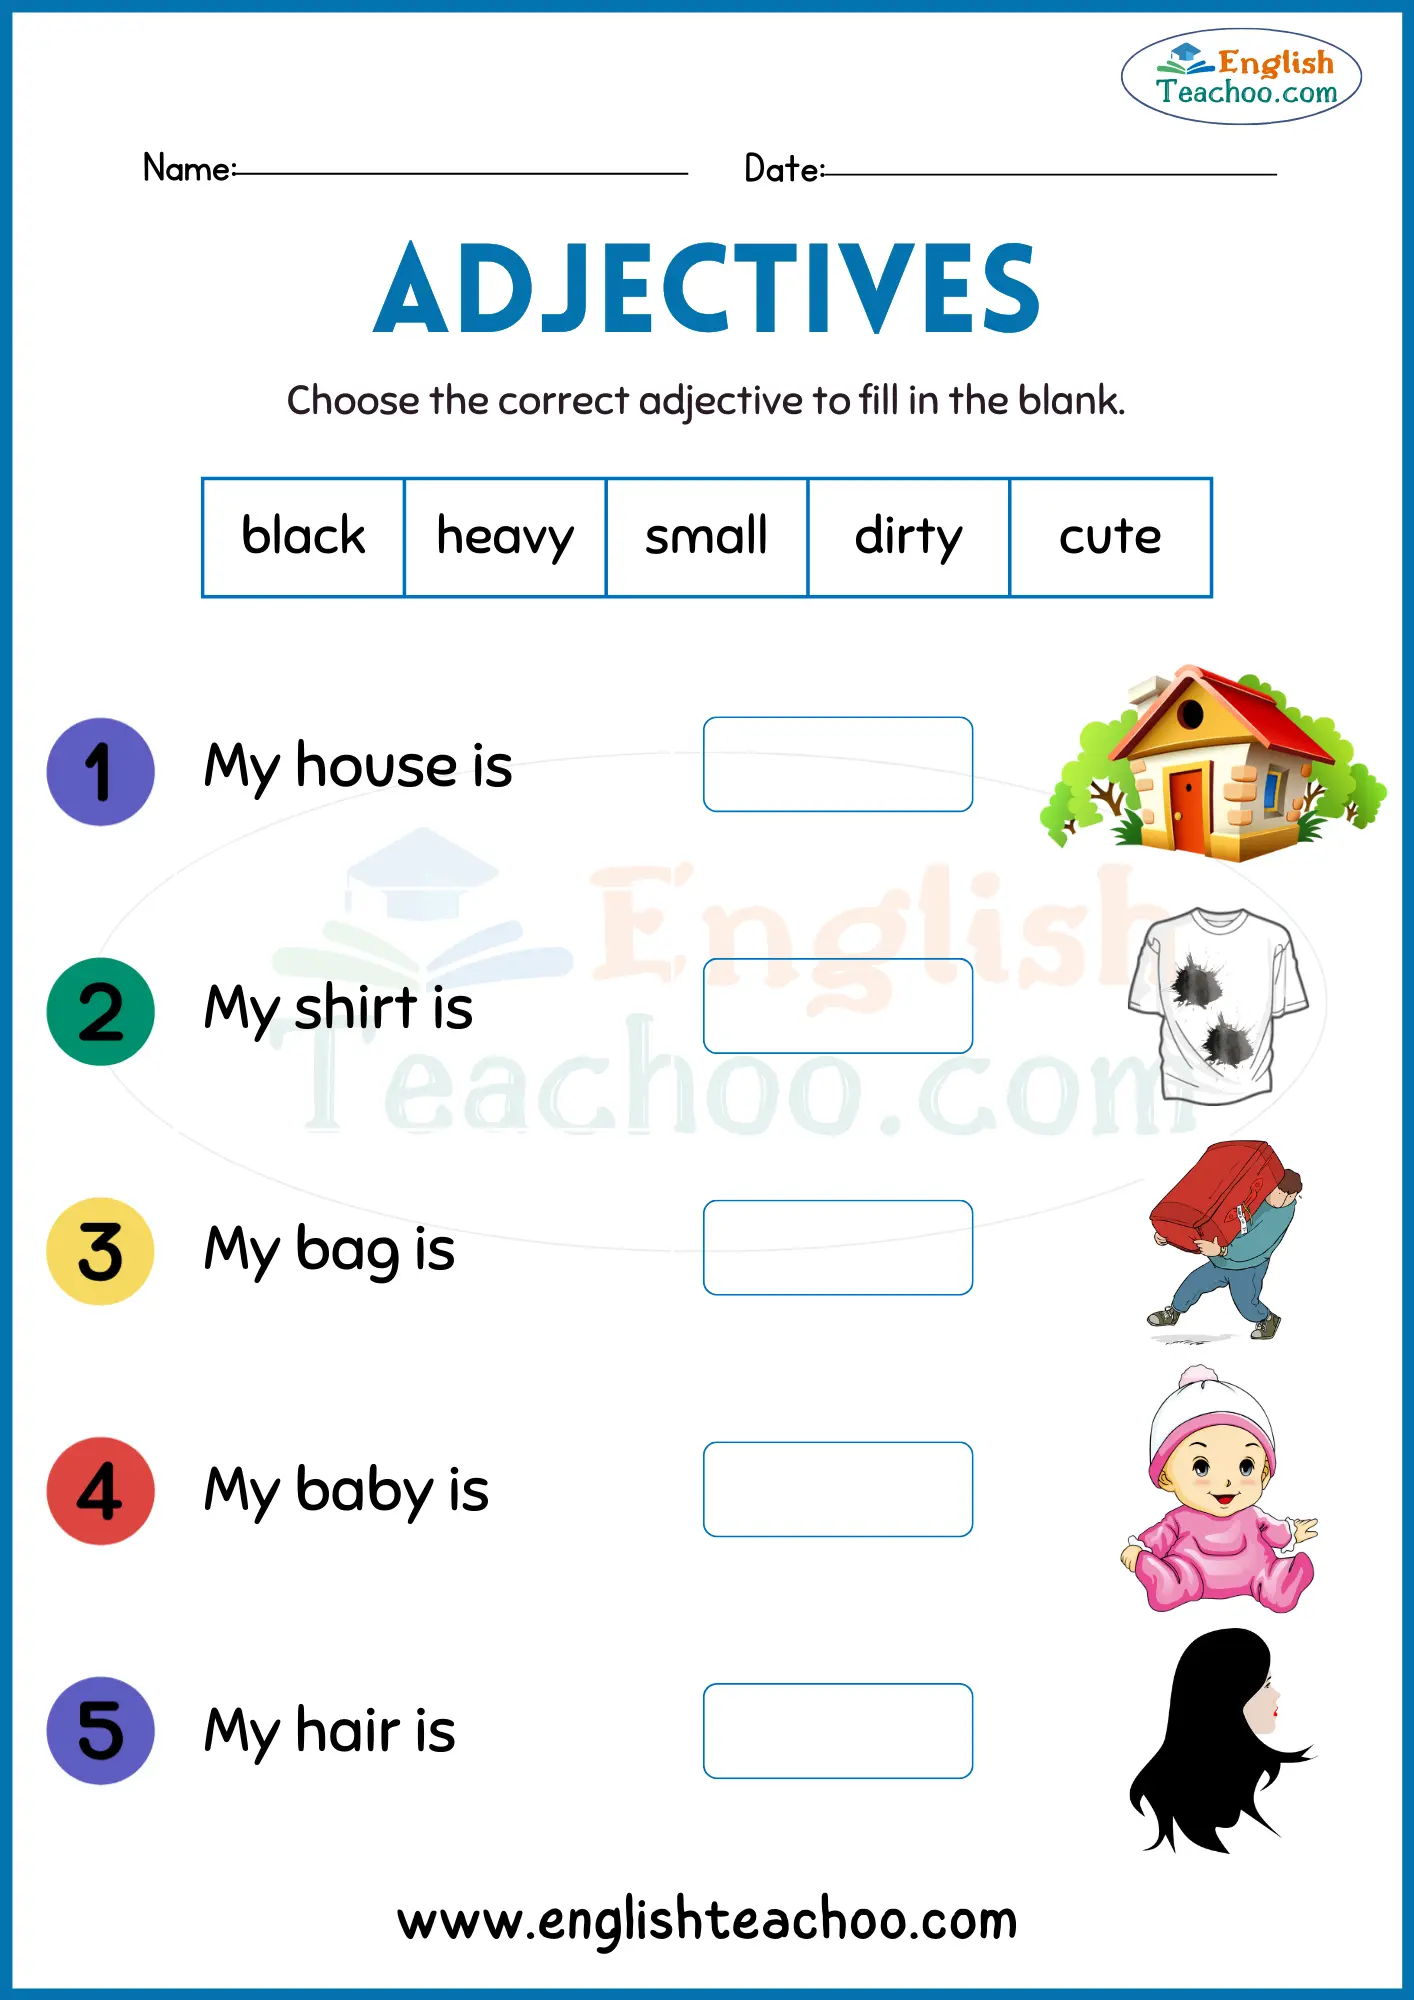 adjectives worksheets for class 2,3,4